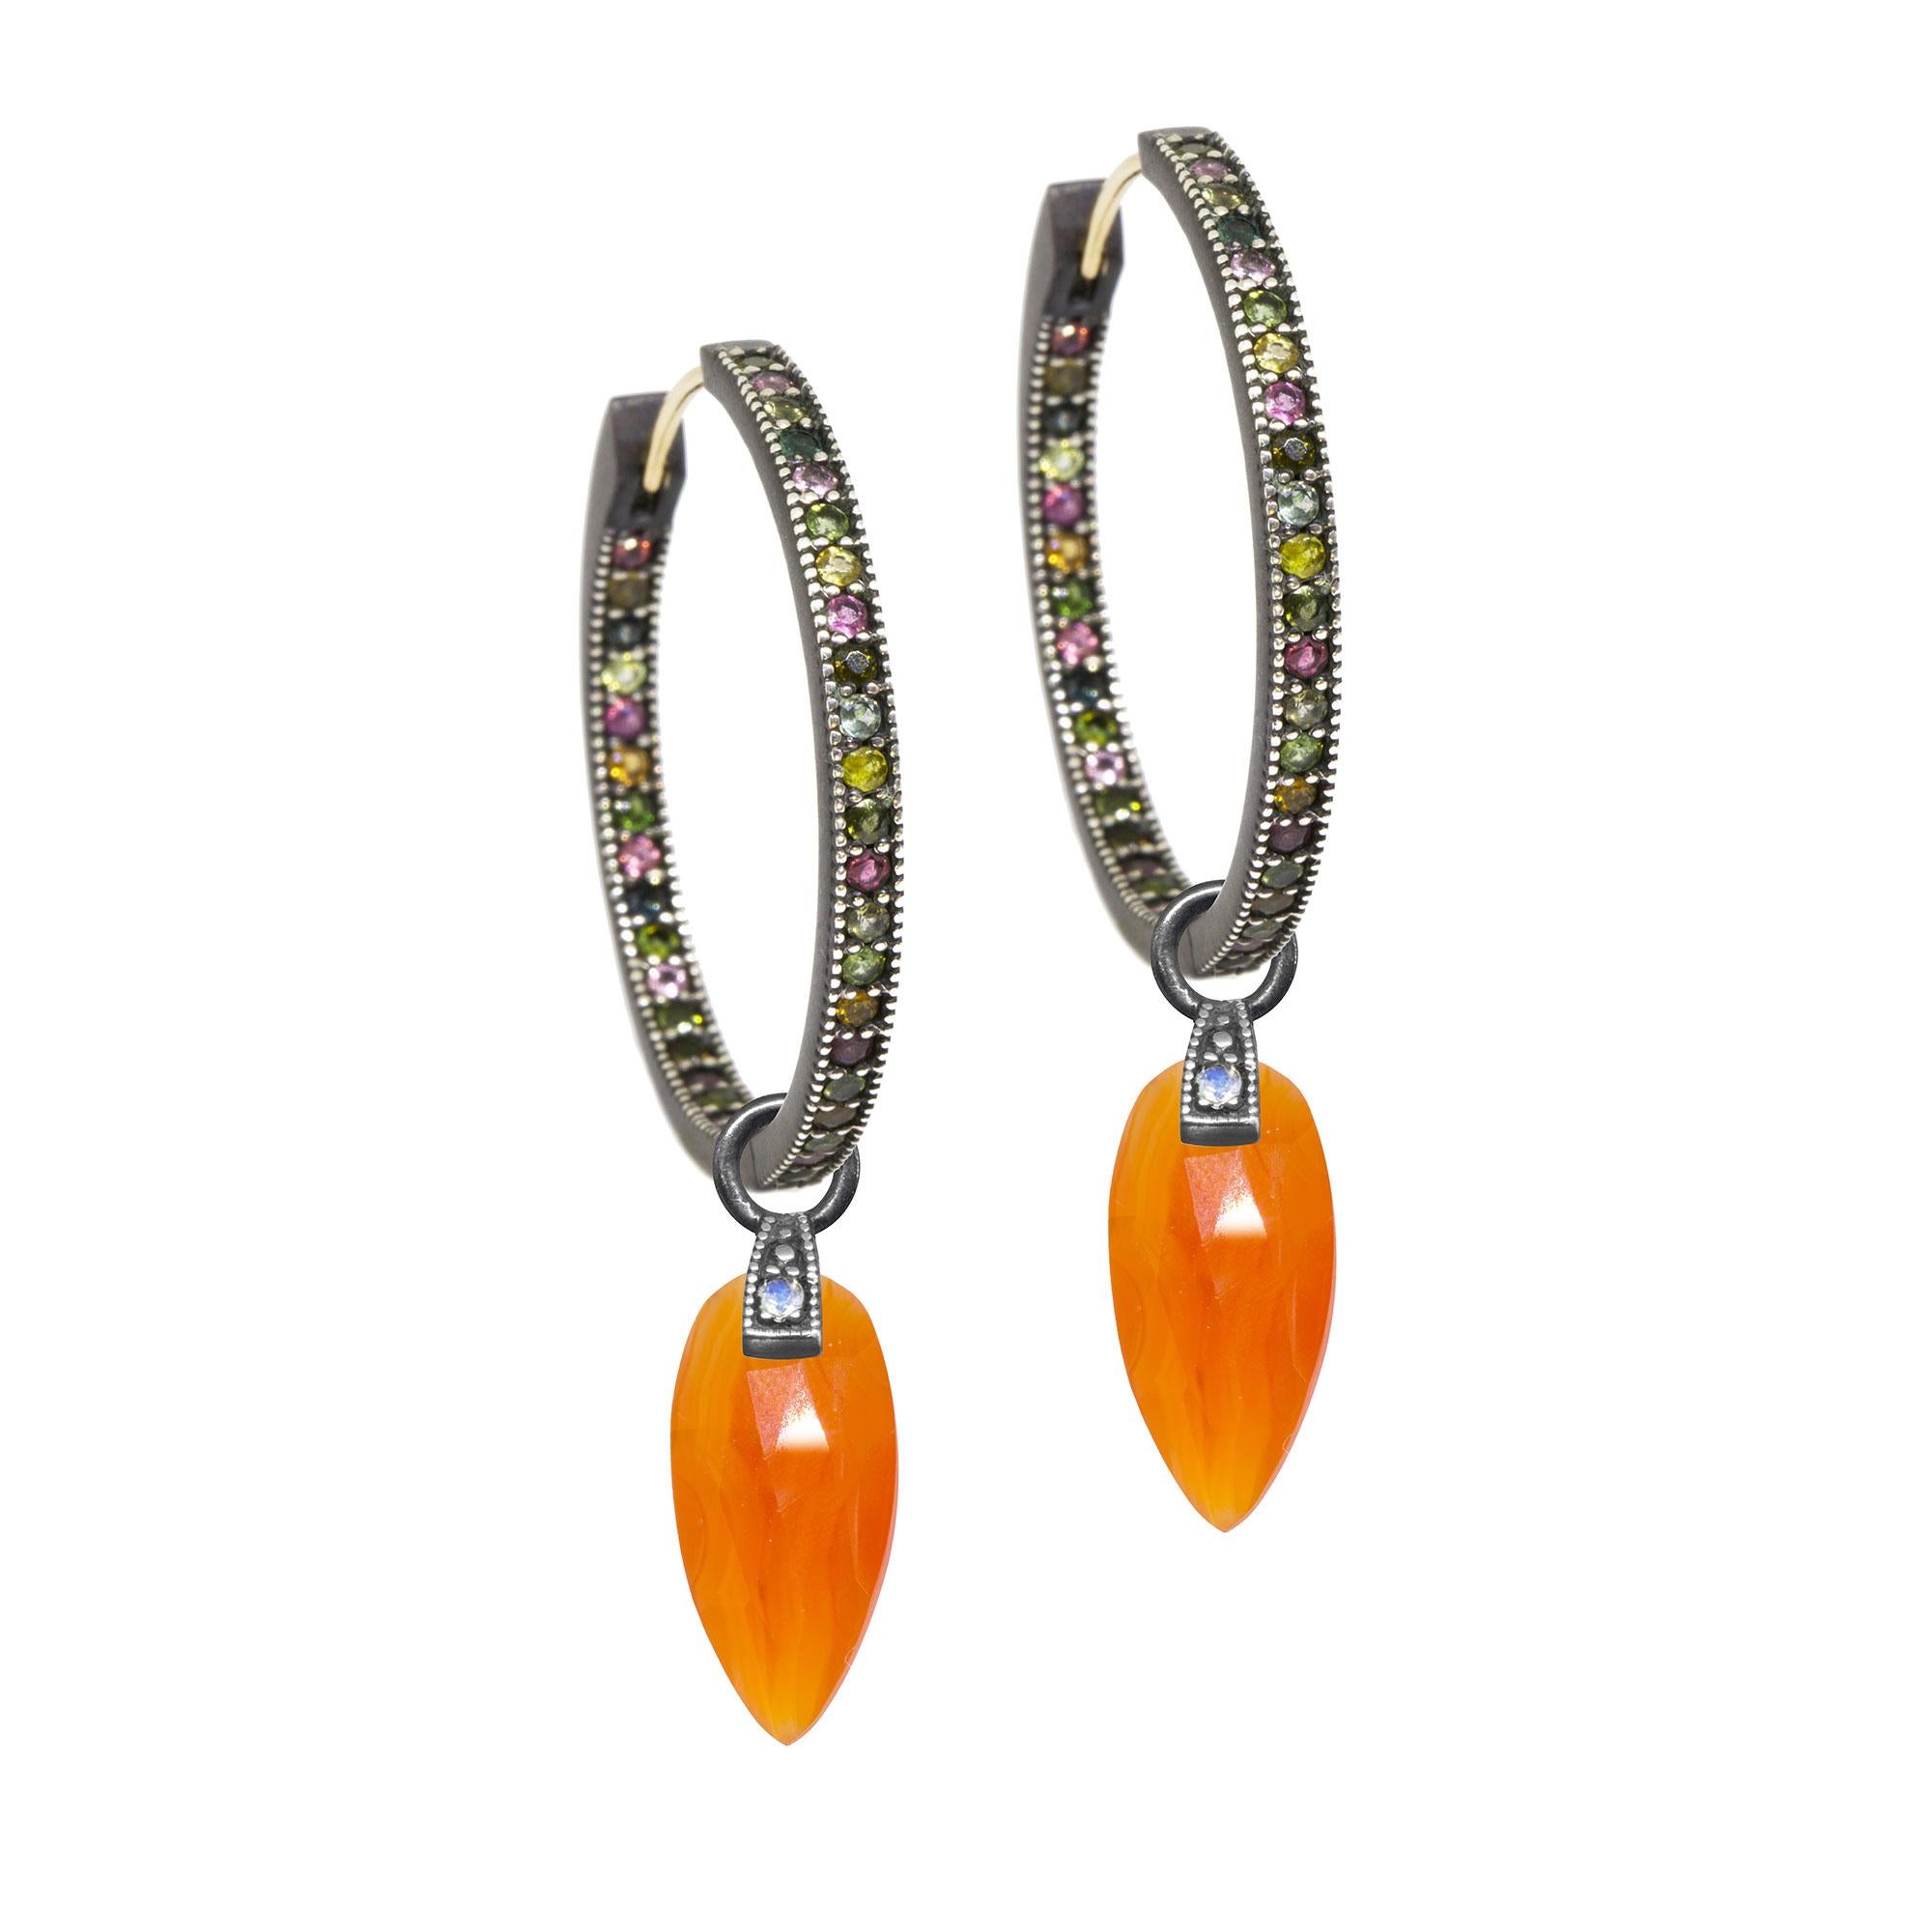 The perfect everyday style, especially when you want a pop of juicy orange, the Angel Wings 15mm Oxidized Charms feature milky carnelian drops dangling from a gemstone-studded bale.

Nina Nguyen Design's patent-pending earrings have an element on